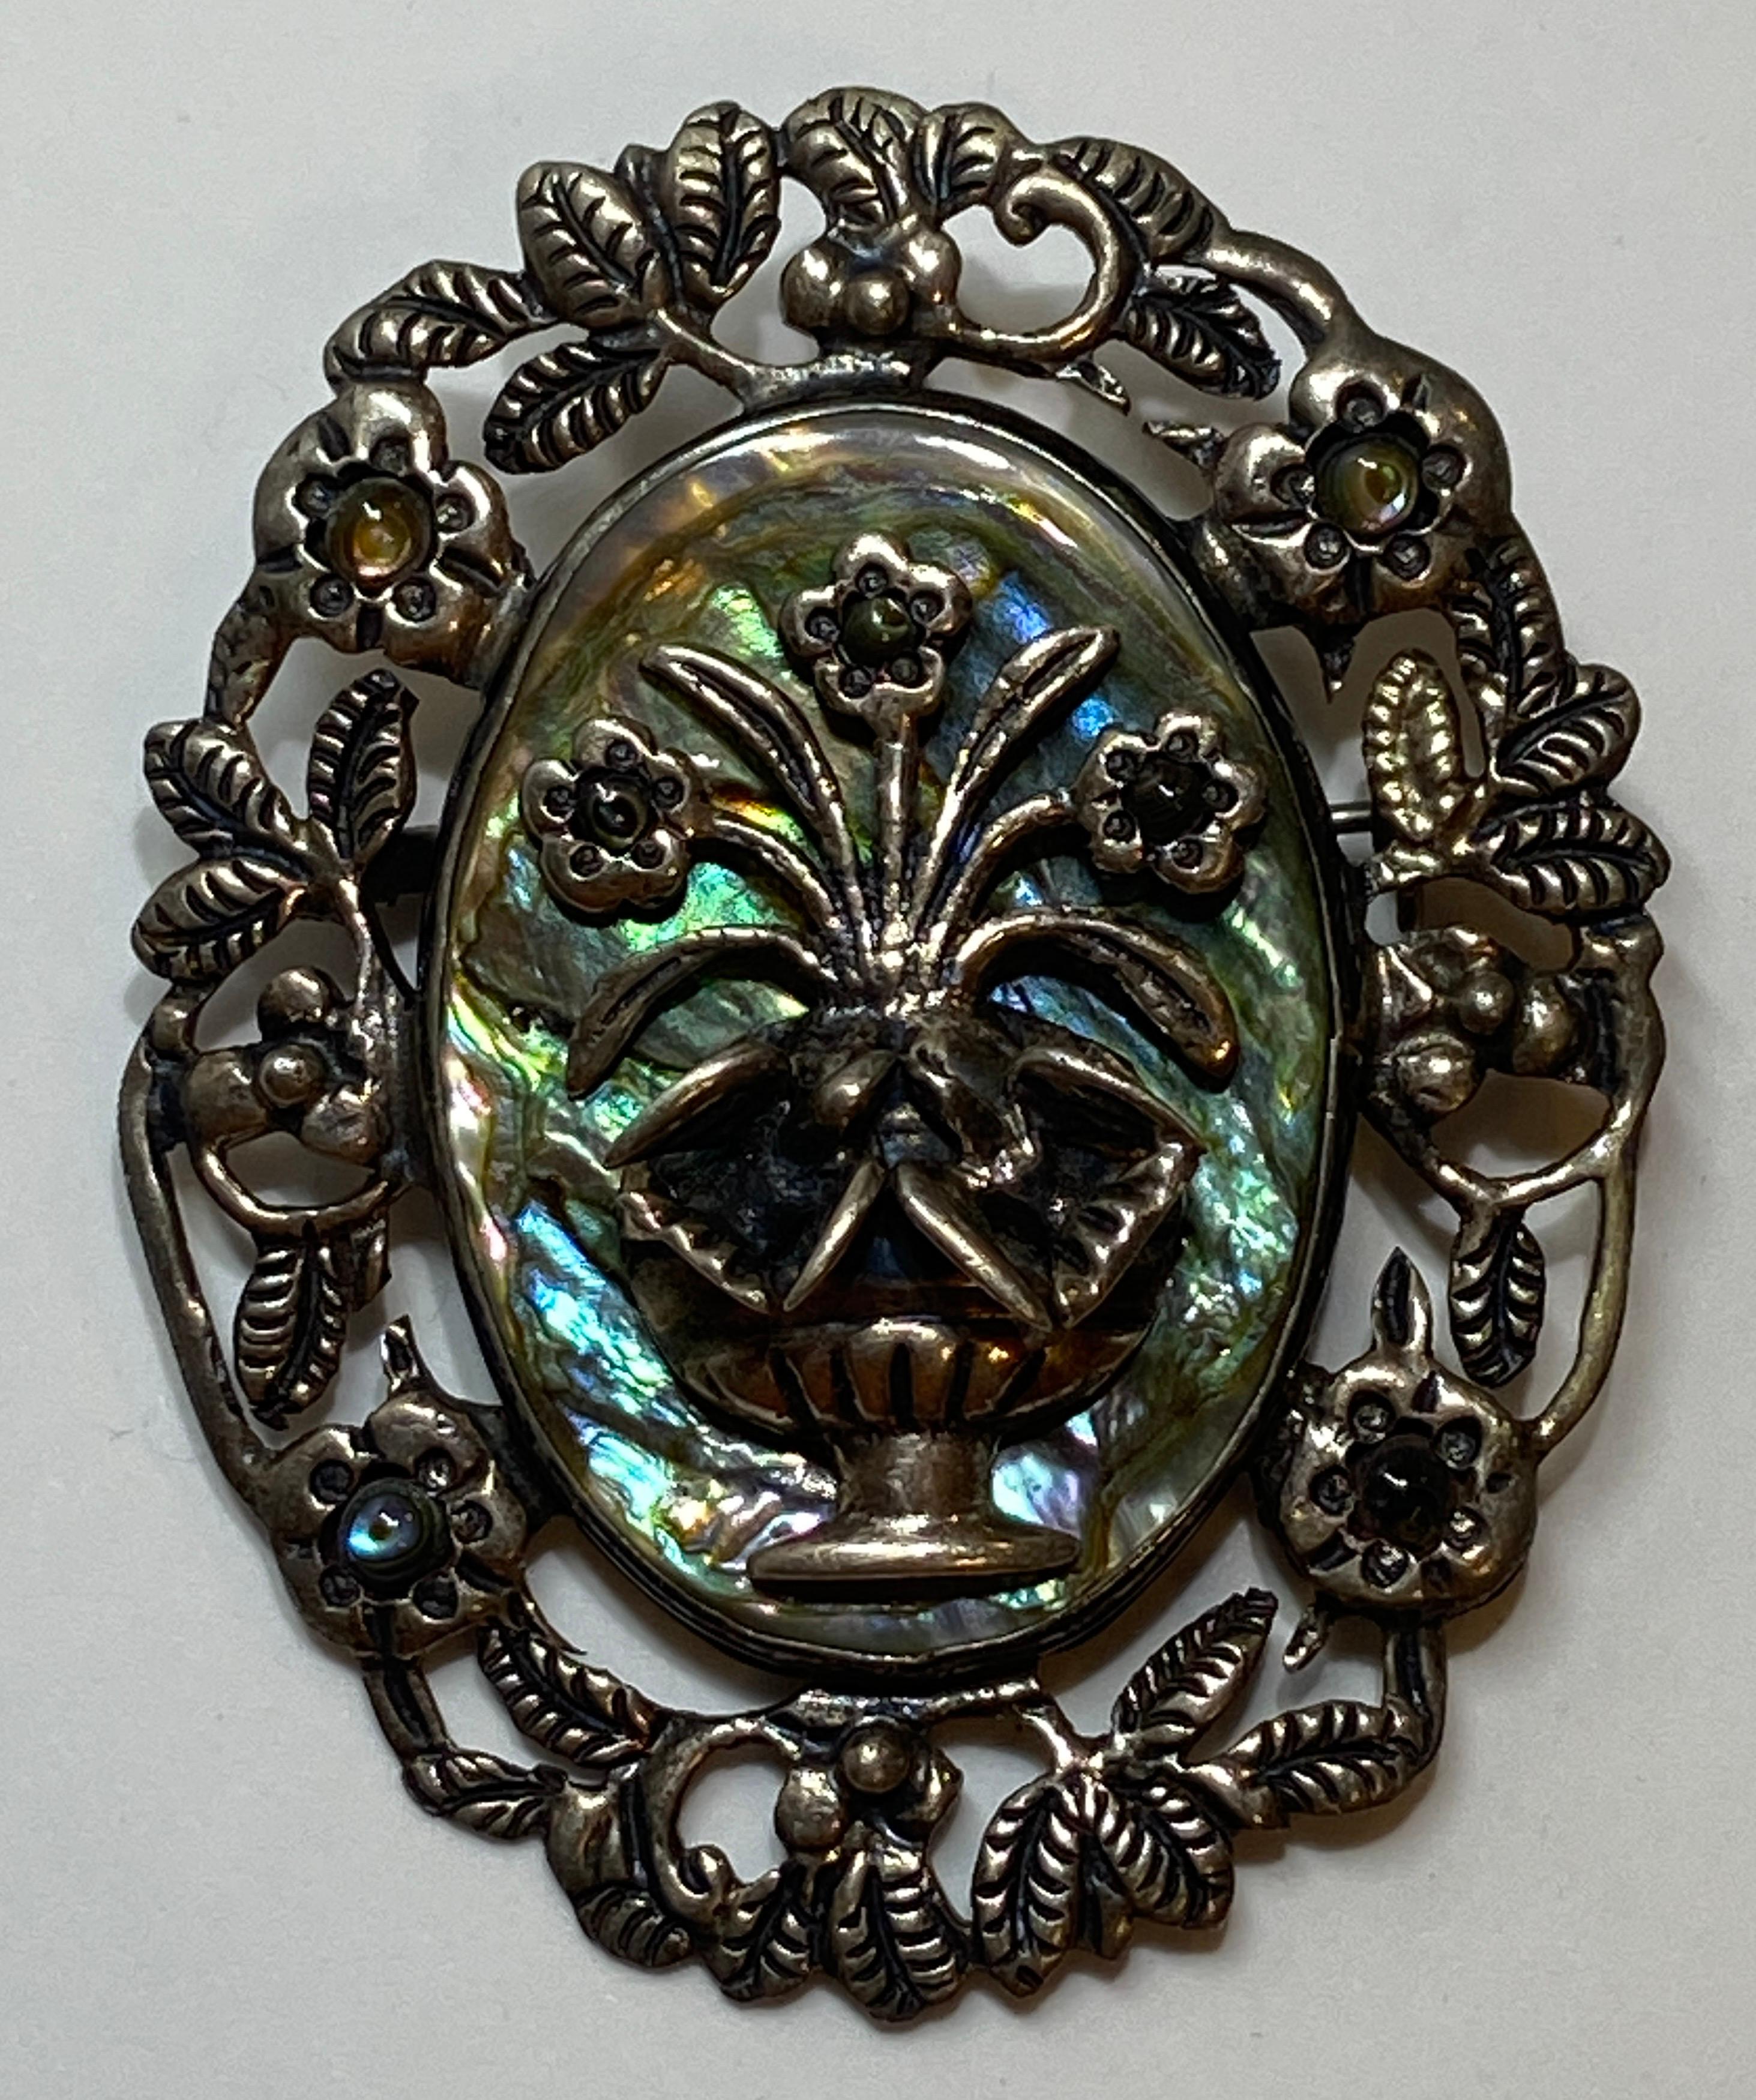 Wonderfully detailed large brooch accented with a abalone center back-drop for the centerpiece featuring a 3-dimensional 'Vase with Fresh-Cut Florals'. Brooch is bordered with floral leaves and florals. This sterling silver brooch has the 'maker's